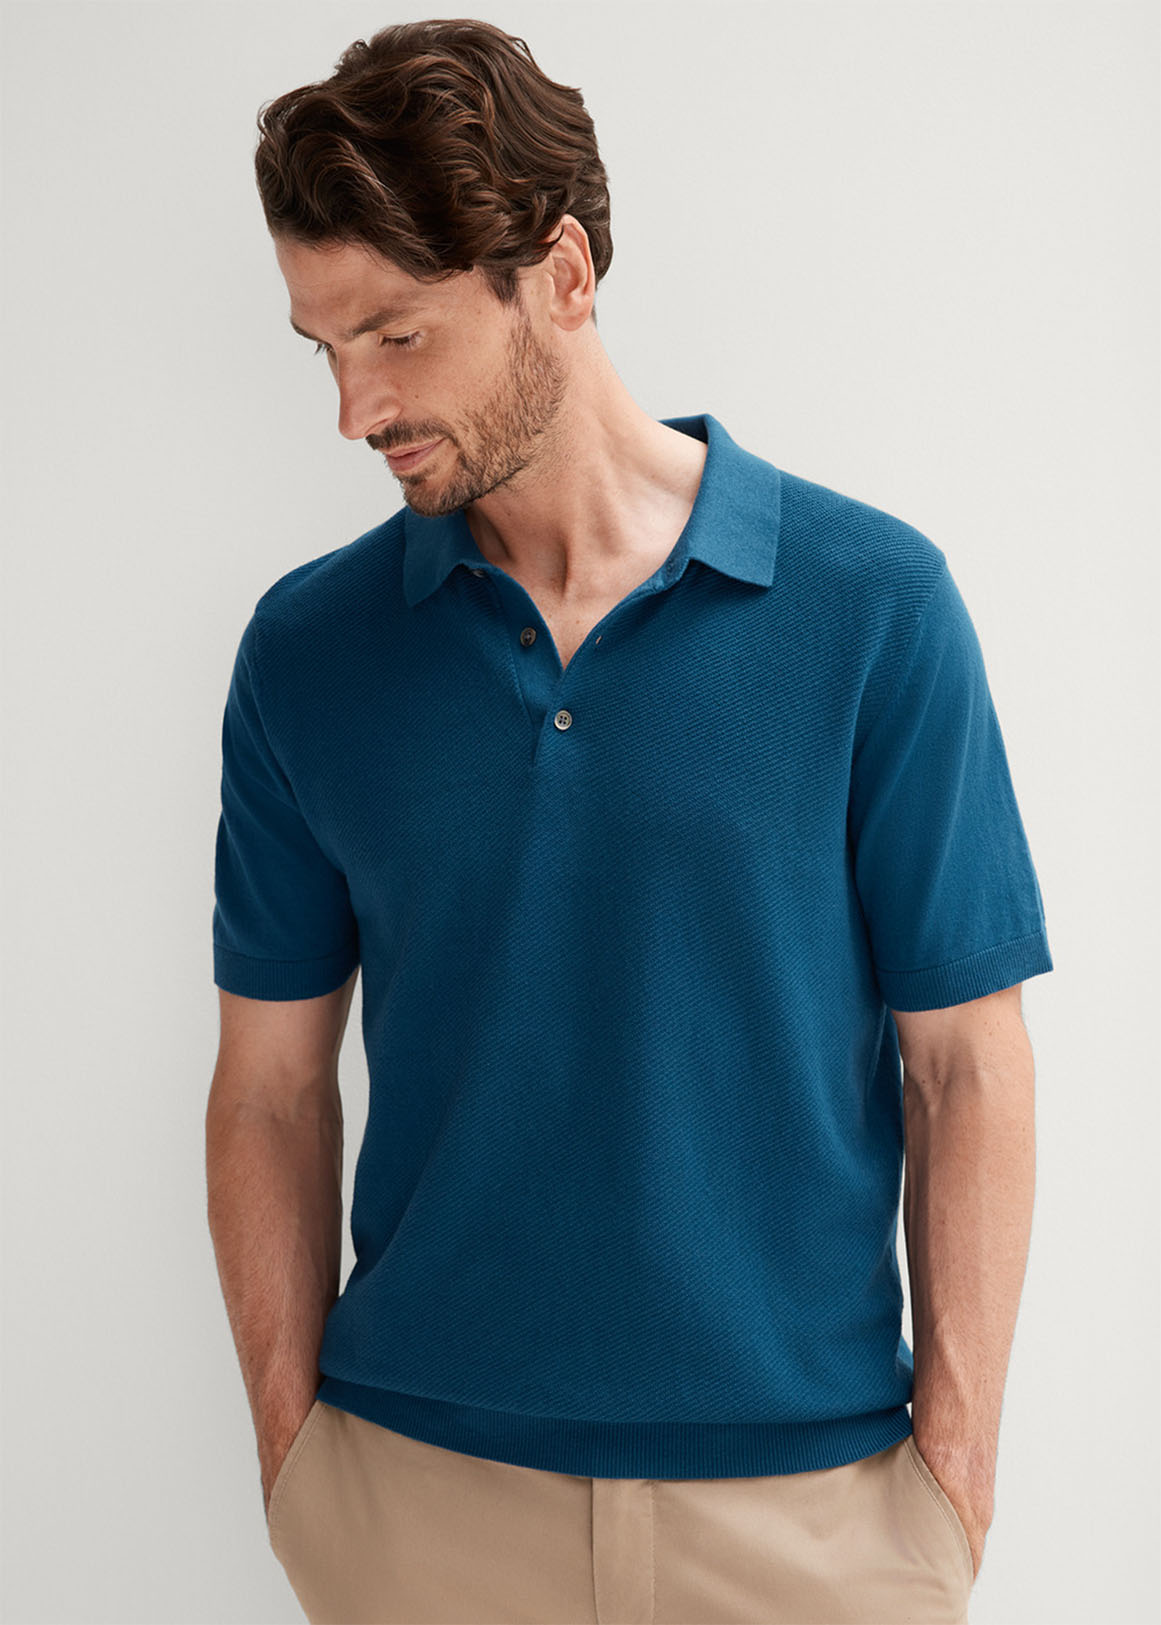 Cotton Cashmere Textured Knit Polo | Woolworths.co.za